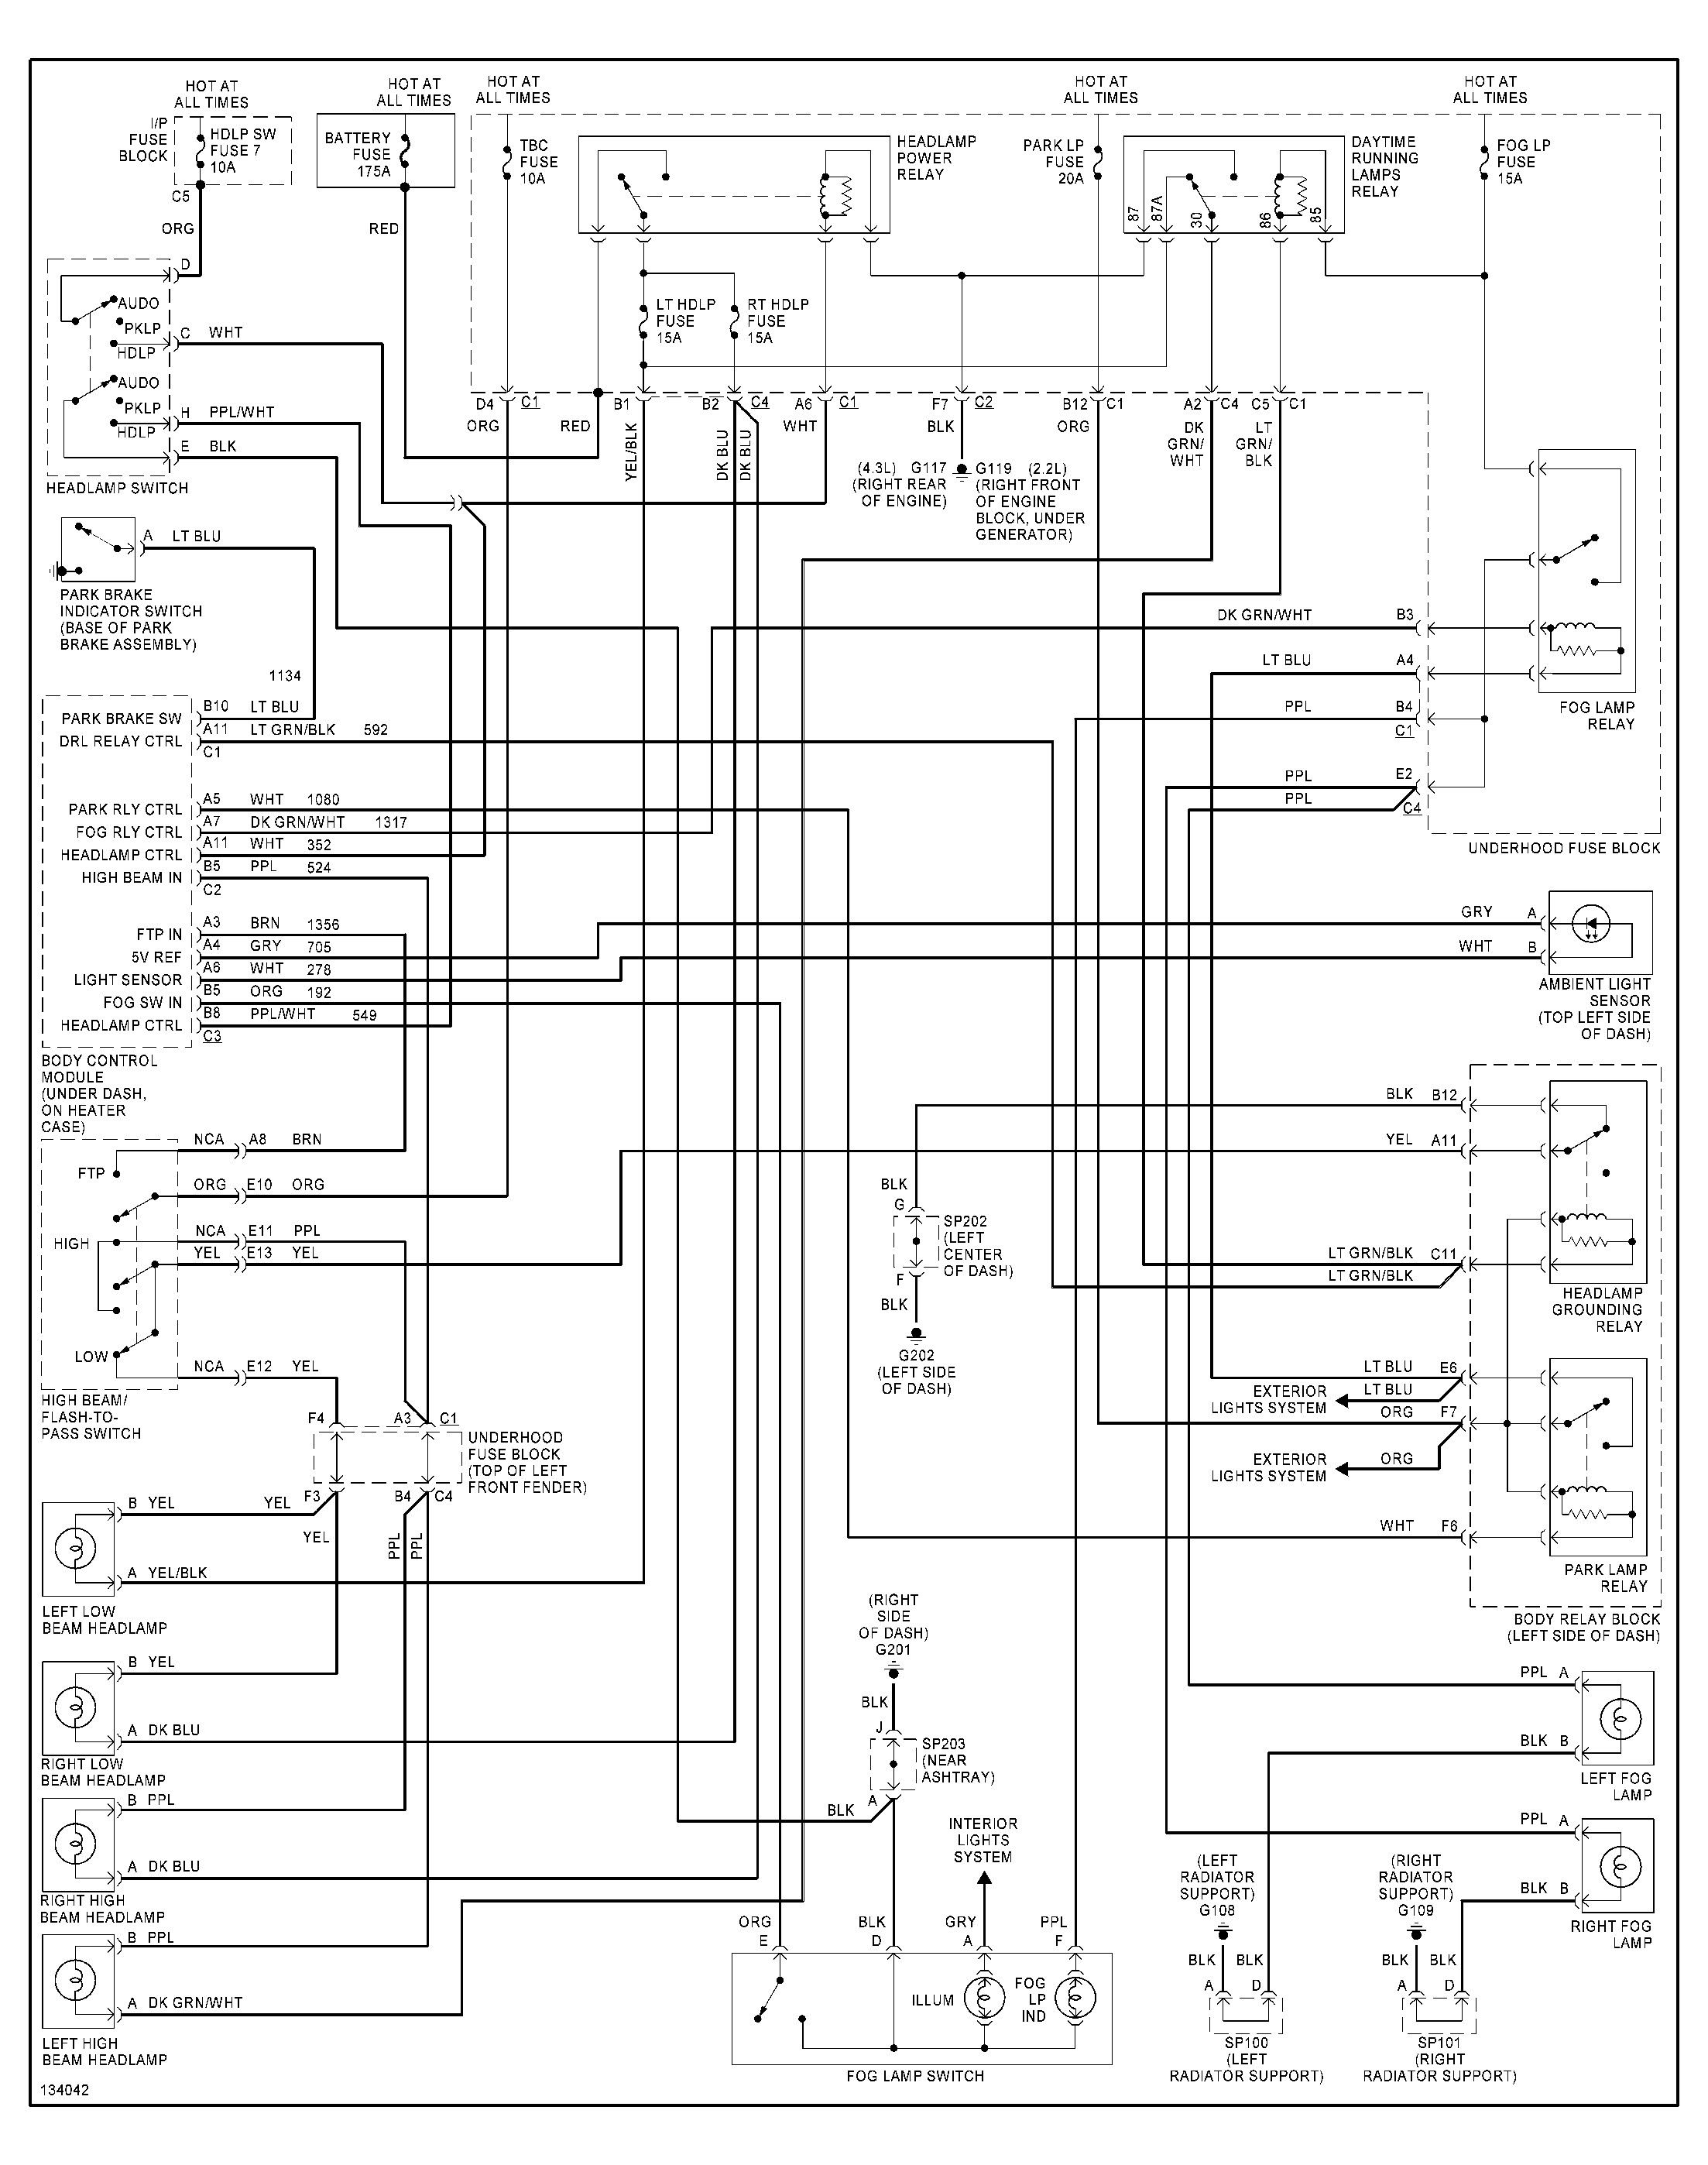 Wiring Diagram for 2001 Chevy S10 4.3 Engine Wiring Diagram] Fuse Diagram 2000 Blazer Full Quality Of Wiring Diagram for 2001 Chevy S10 4.3 Engine